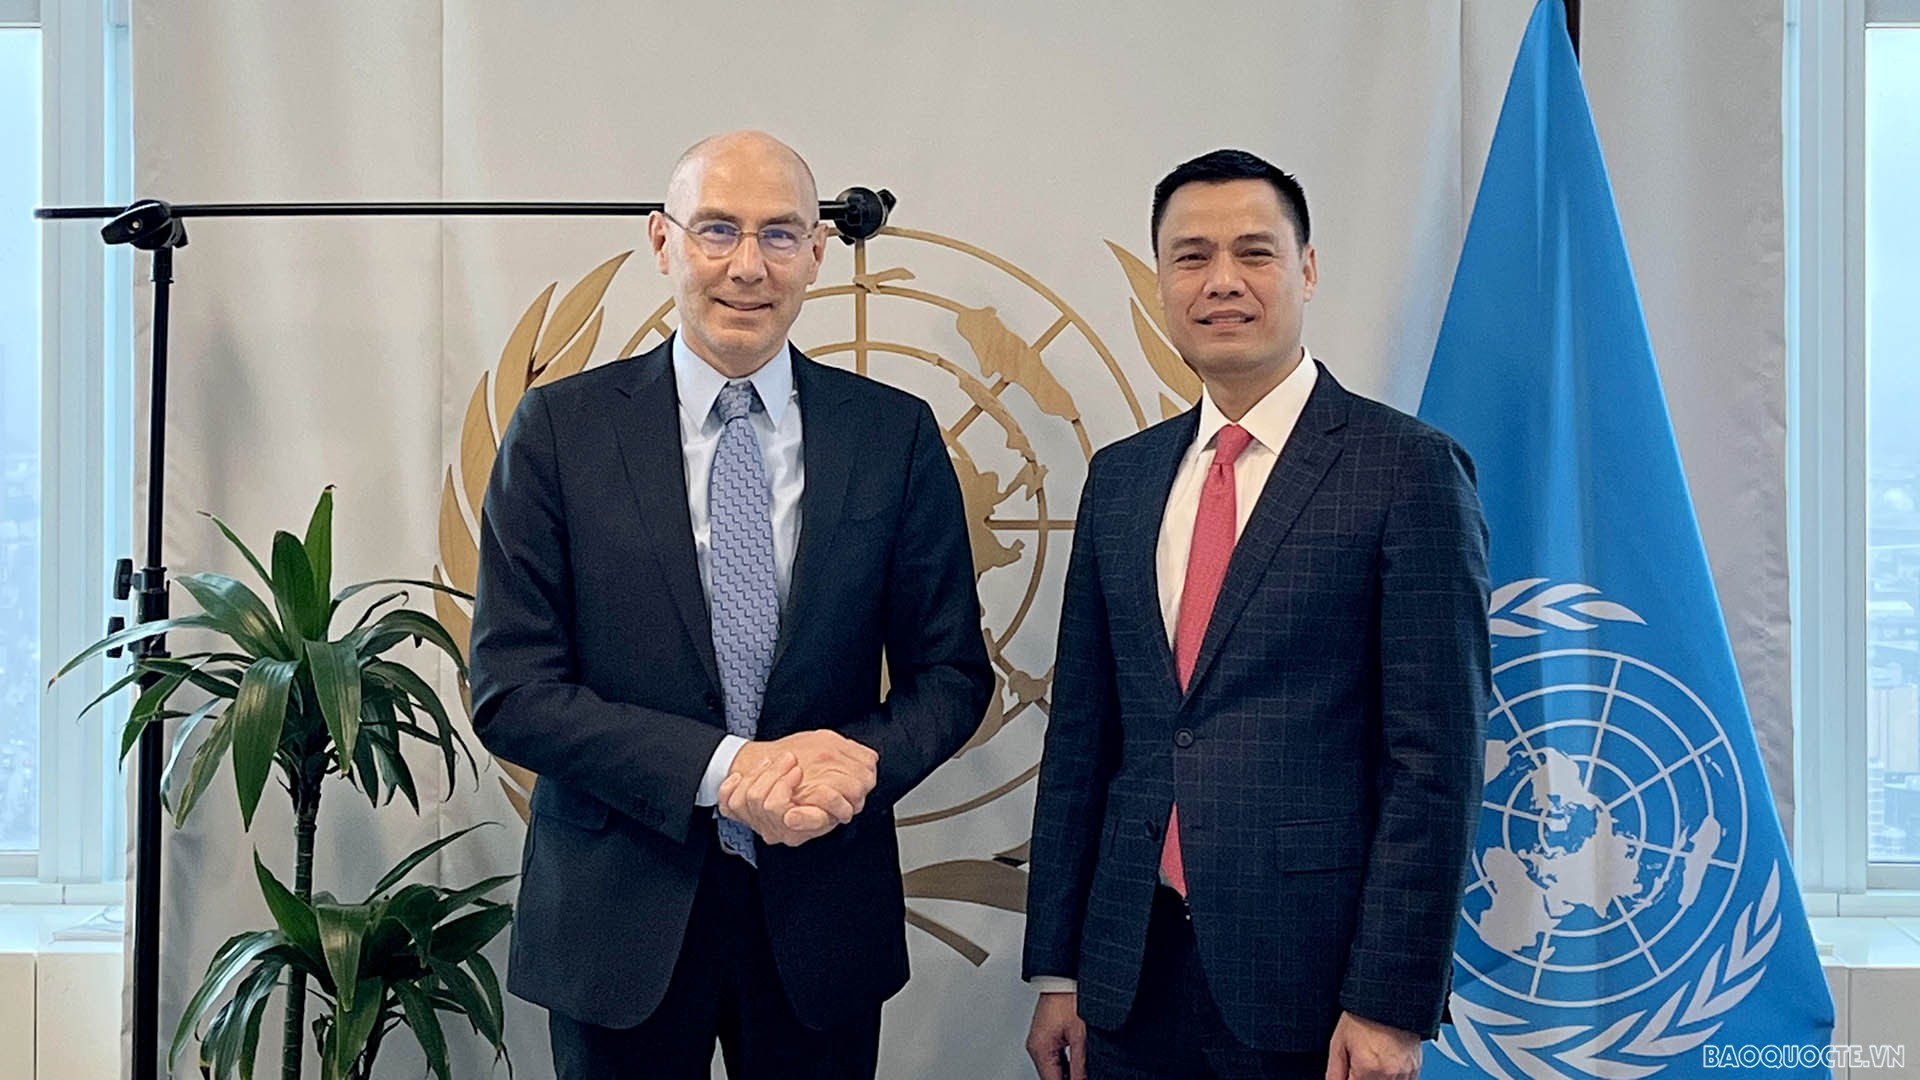 Ambassador Dang Hoang Giang, Head of the Permanent Representative of Vietnam to the United Nations, worked with Mr. Volker Turk, UN Deputy Secretary-General in charge of policy. 